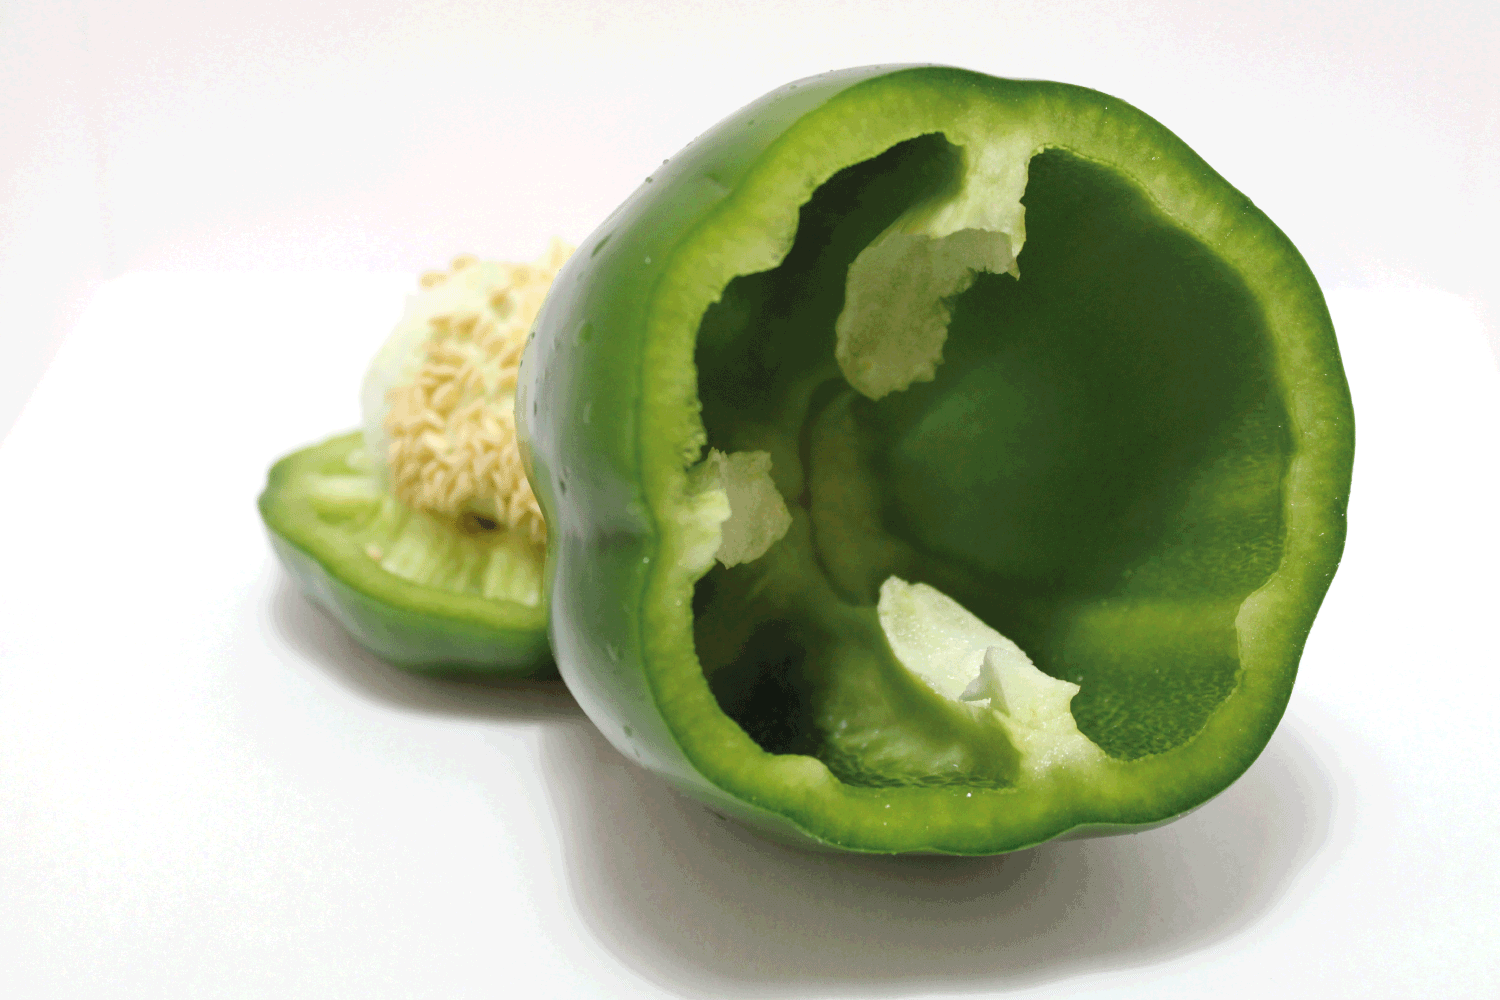 Fresh, washed green pepper with white background - great for recipes that have green peppers - Sliced open, showing inside